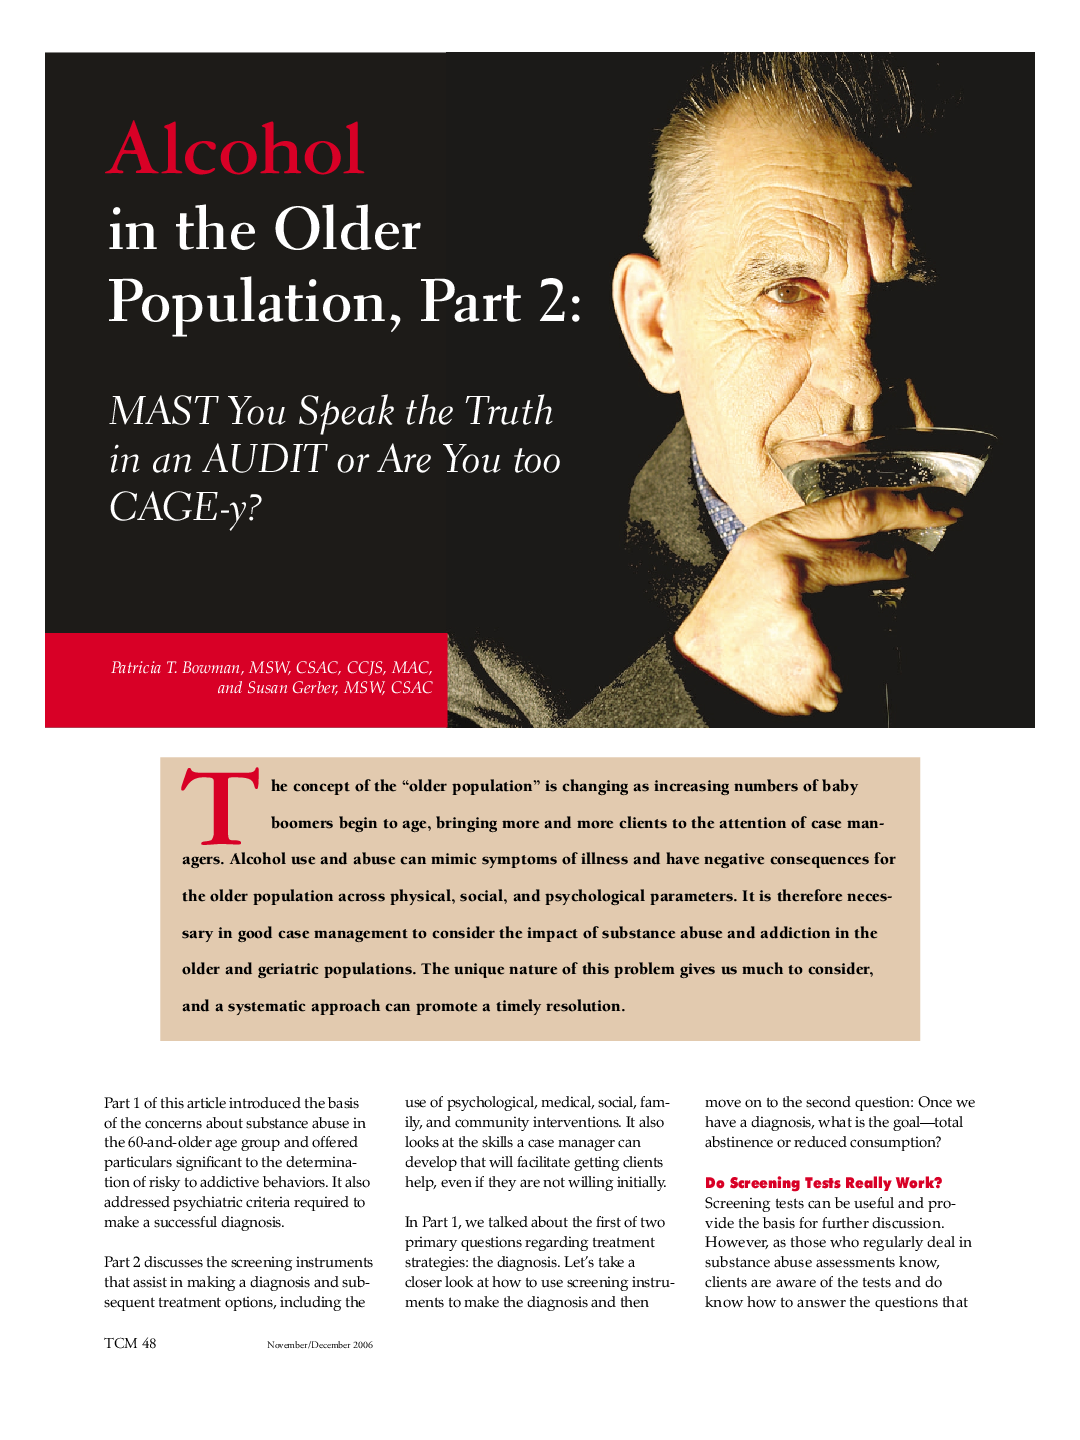 Alcohol in the older population, Part 2: MAST you speak the truth in an AUDIT or are you too CAGE-y? 